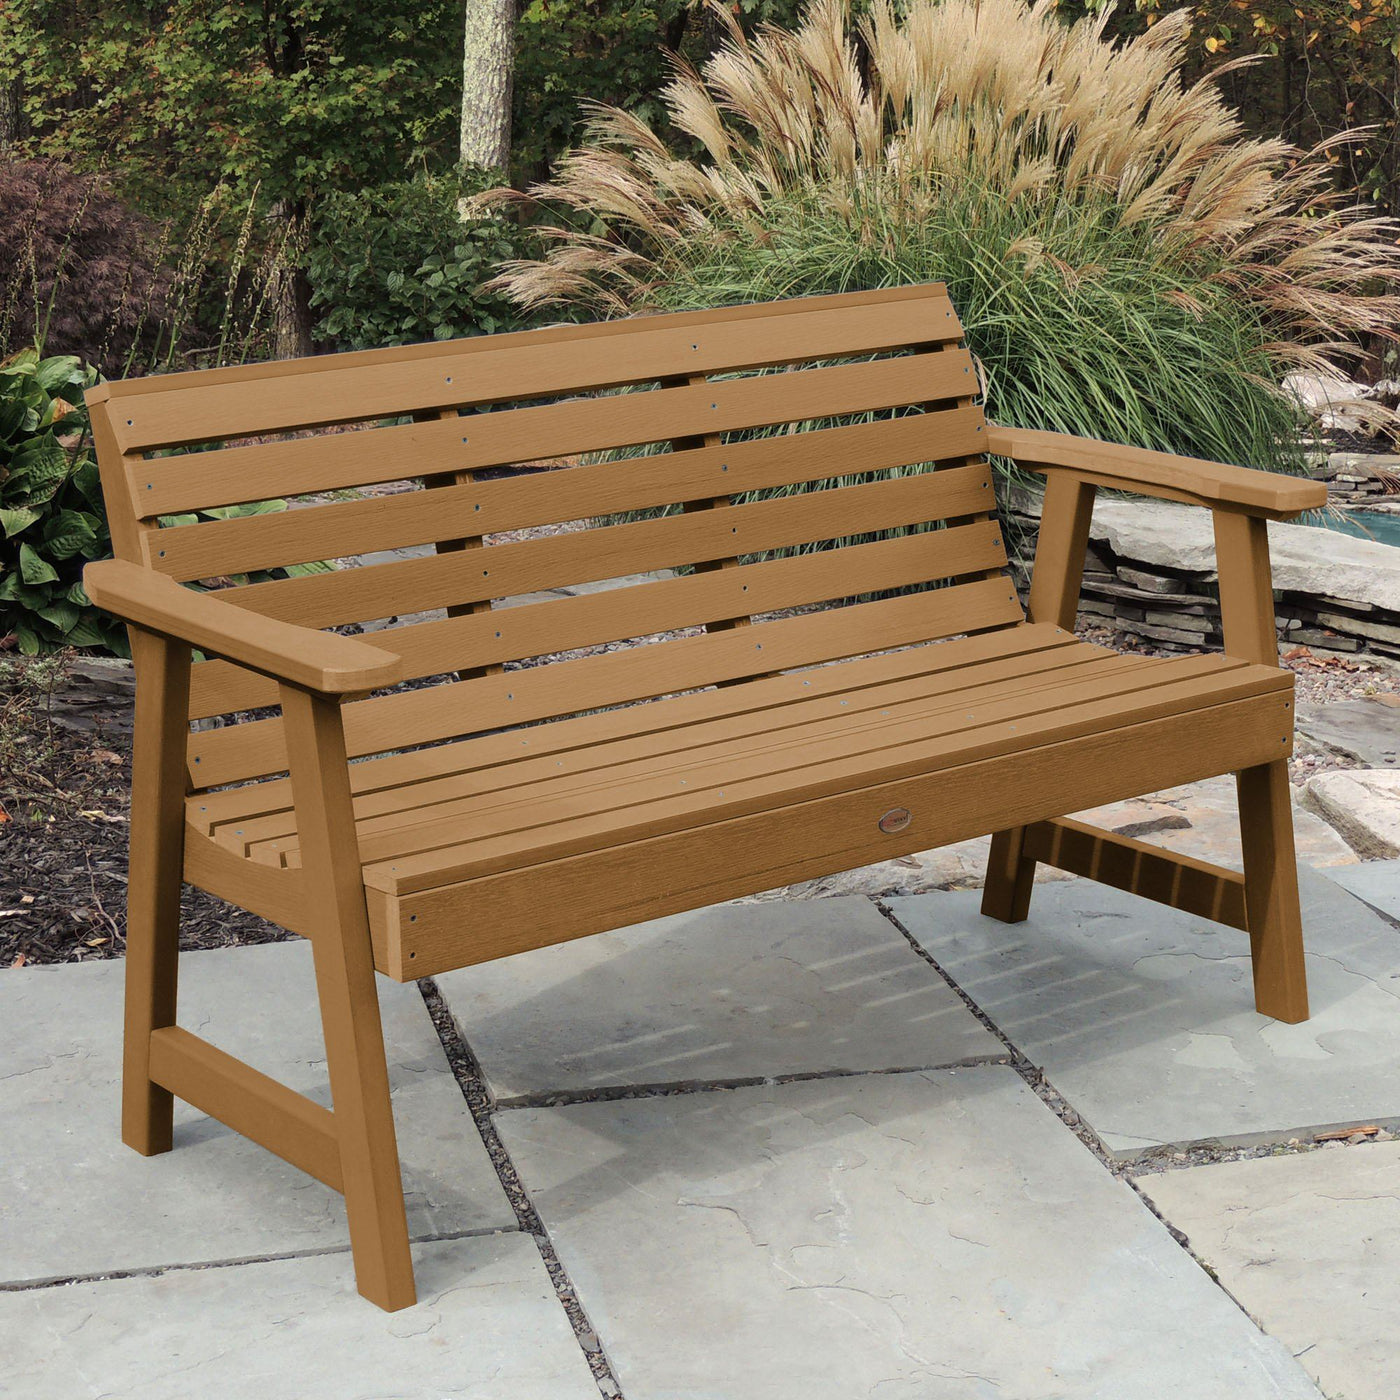 Weatherly Garden Bench - 5ft BenchSwing Highwood USA 